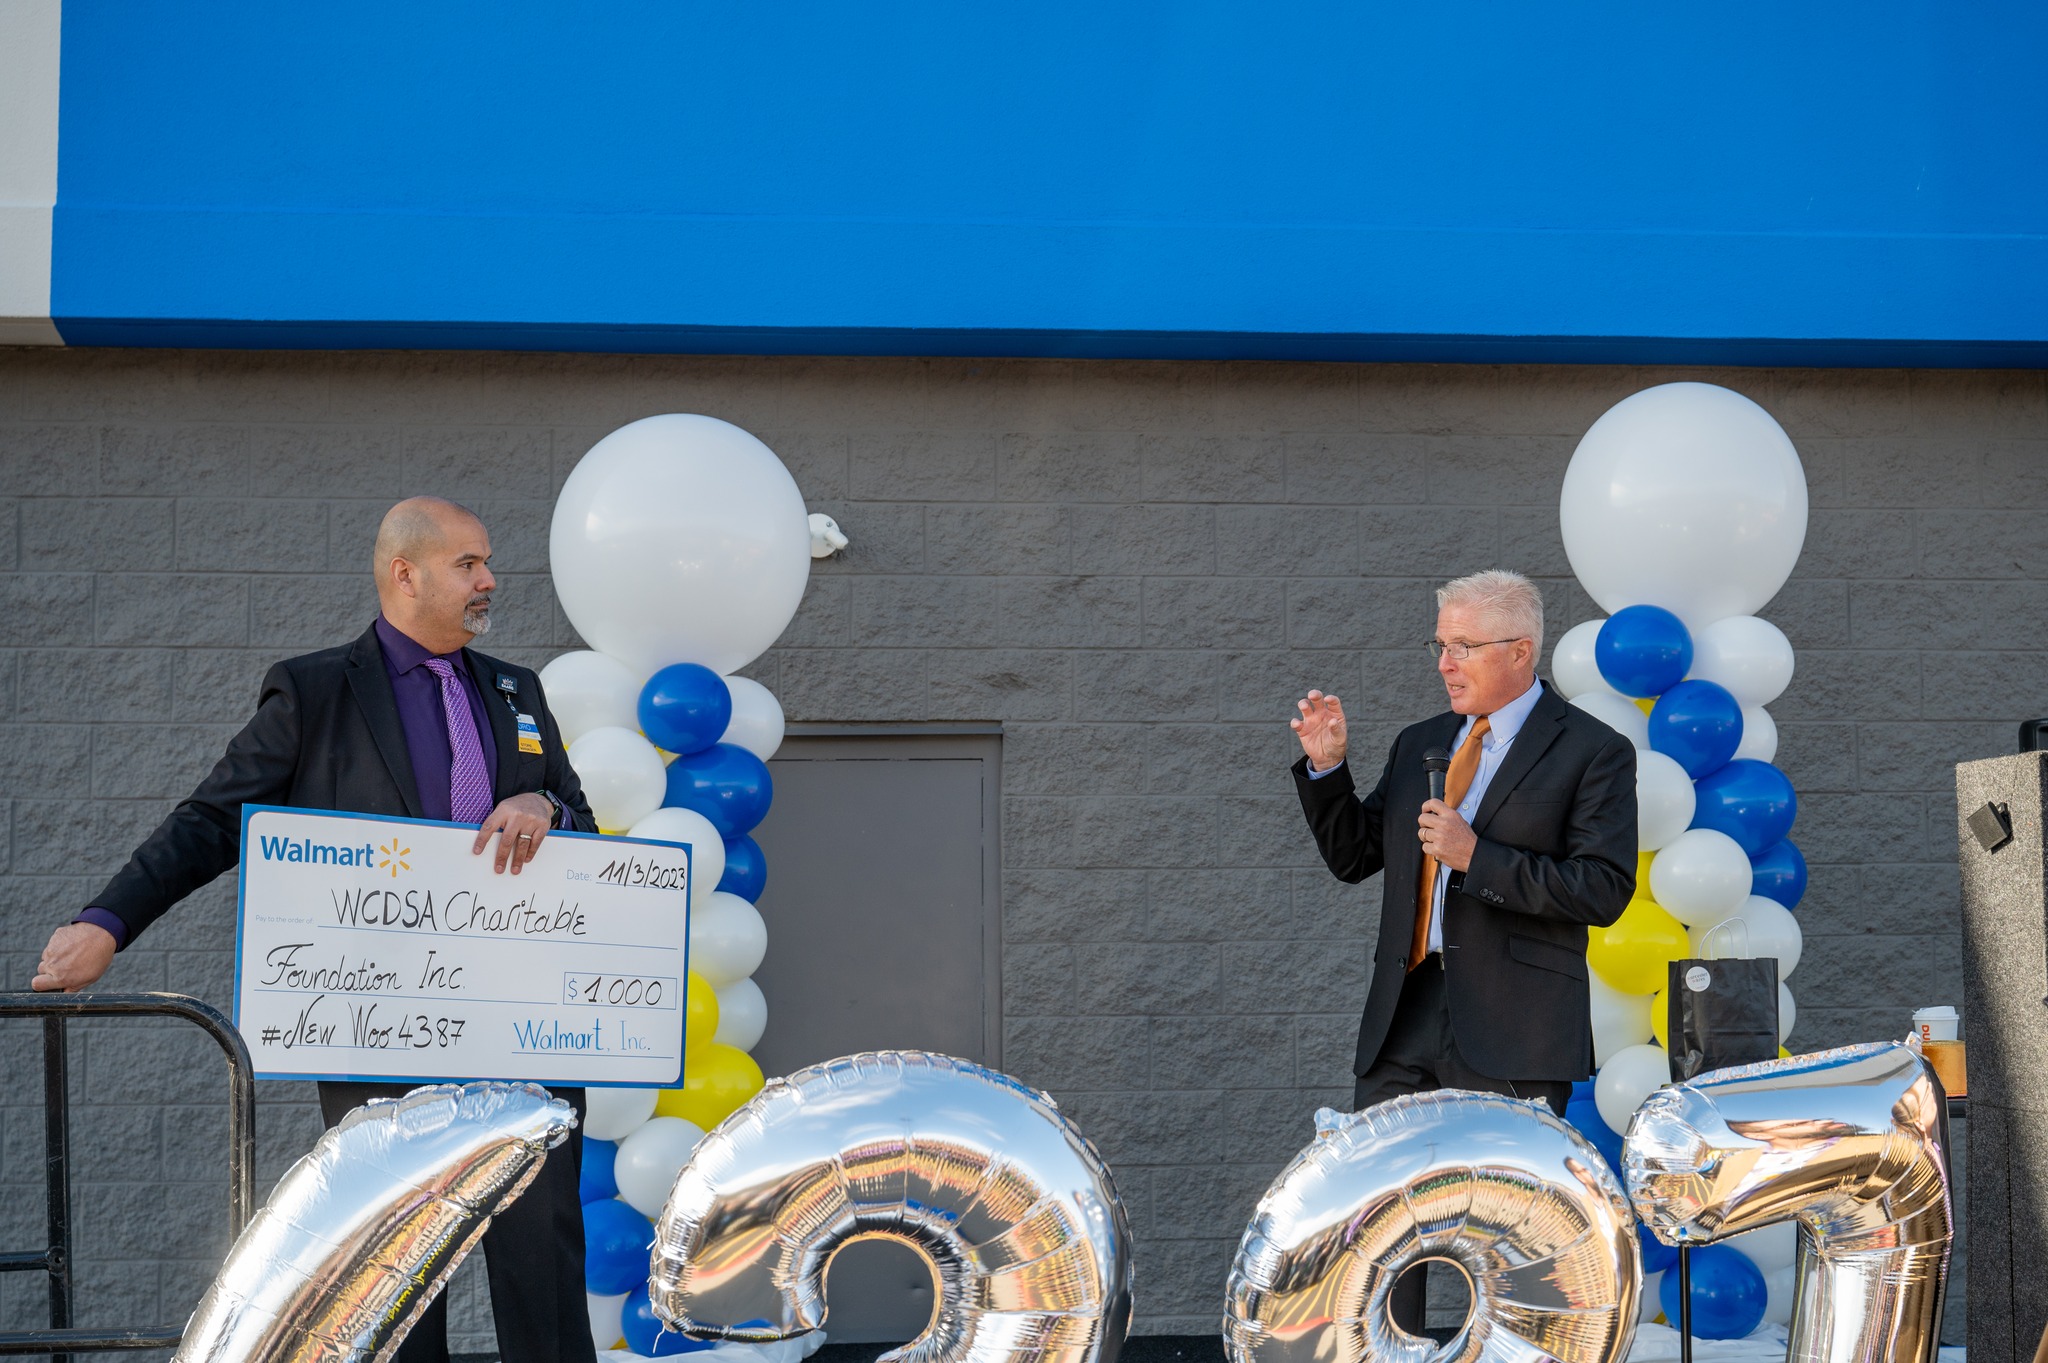 Worcester Walmart rolls out $8 million revamp to address safety, cleanliness issues